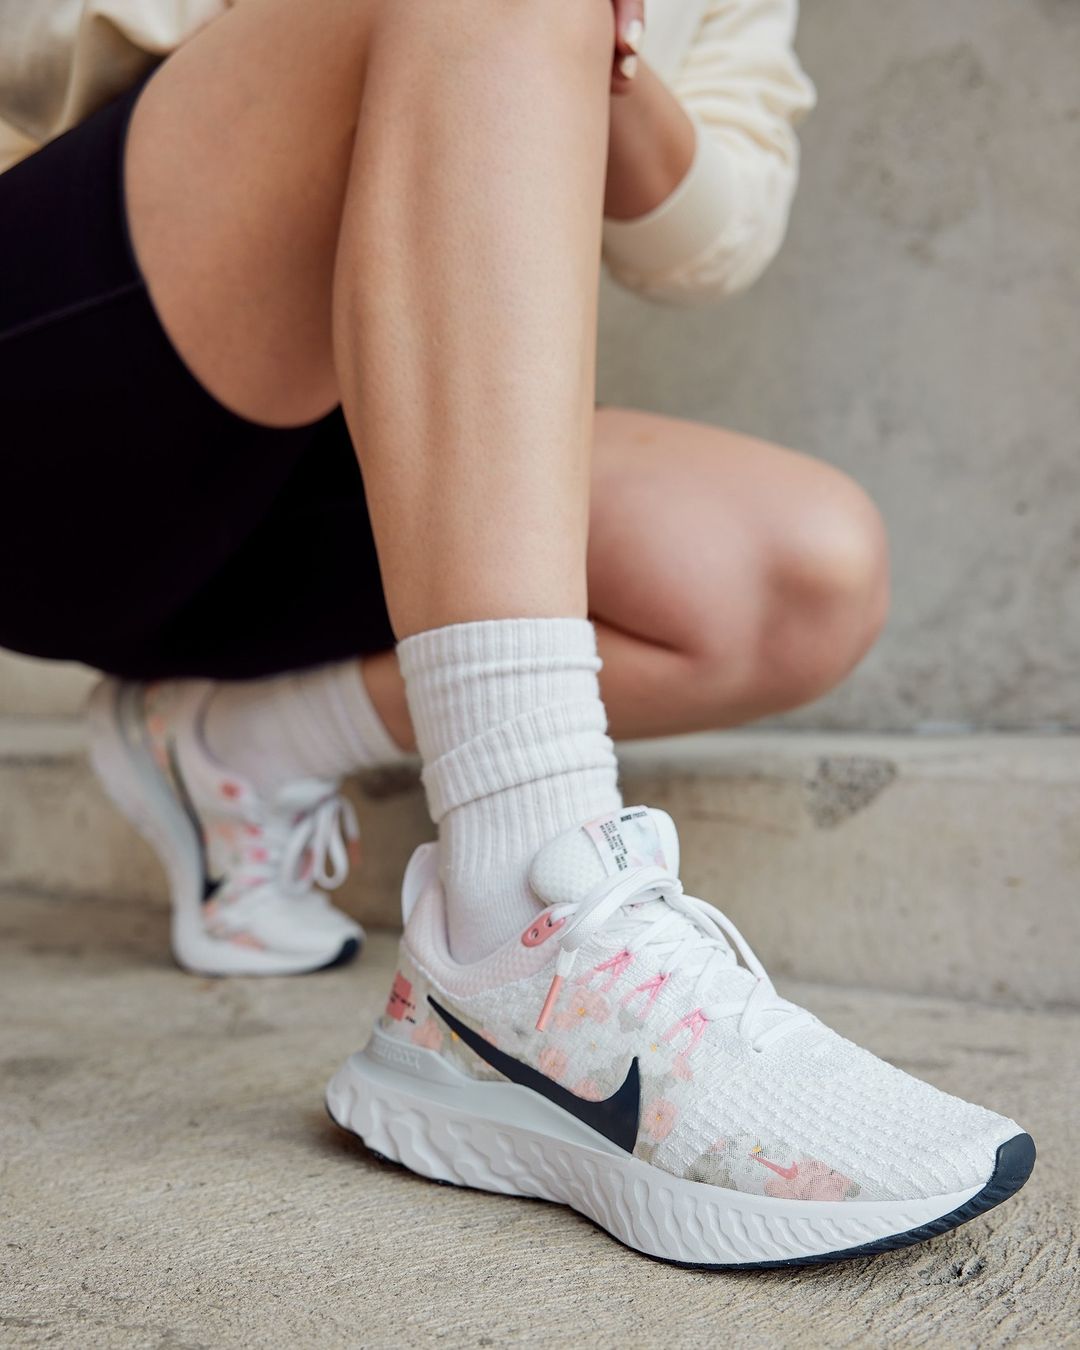 GIÀY NIKE NỮ REACT INFINITY 3 PREMIUM WHITE PEARL PINK WOMENS ROAD RUNNING SHOES FD4151-100 6